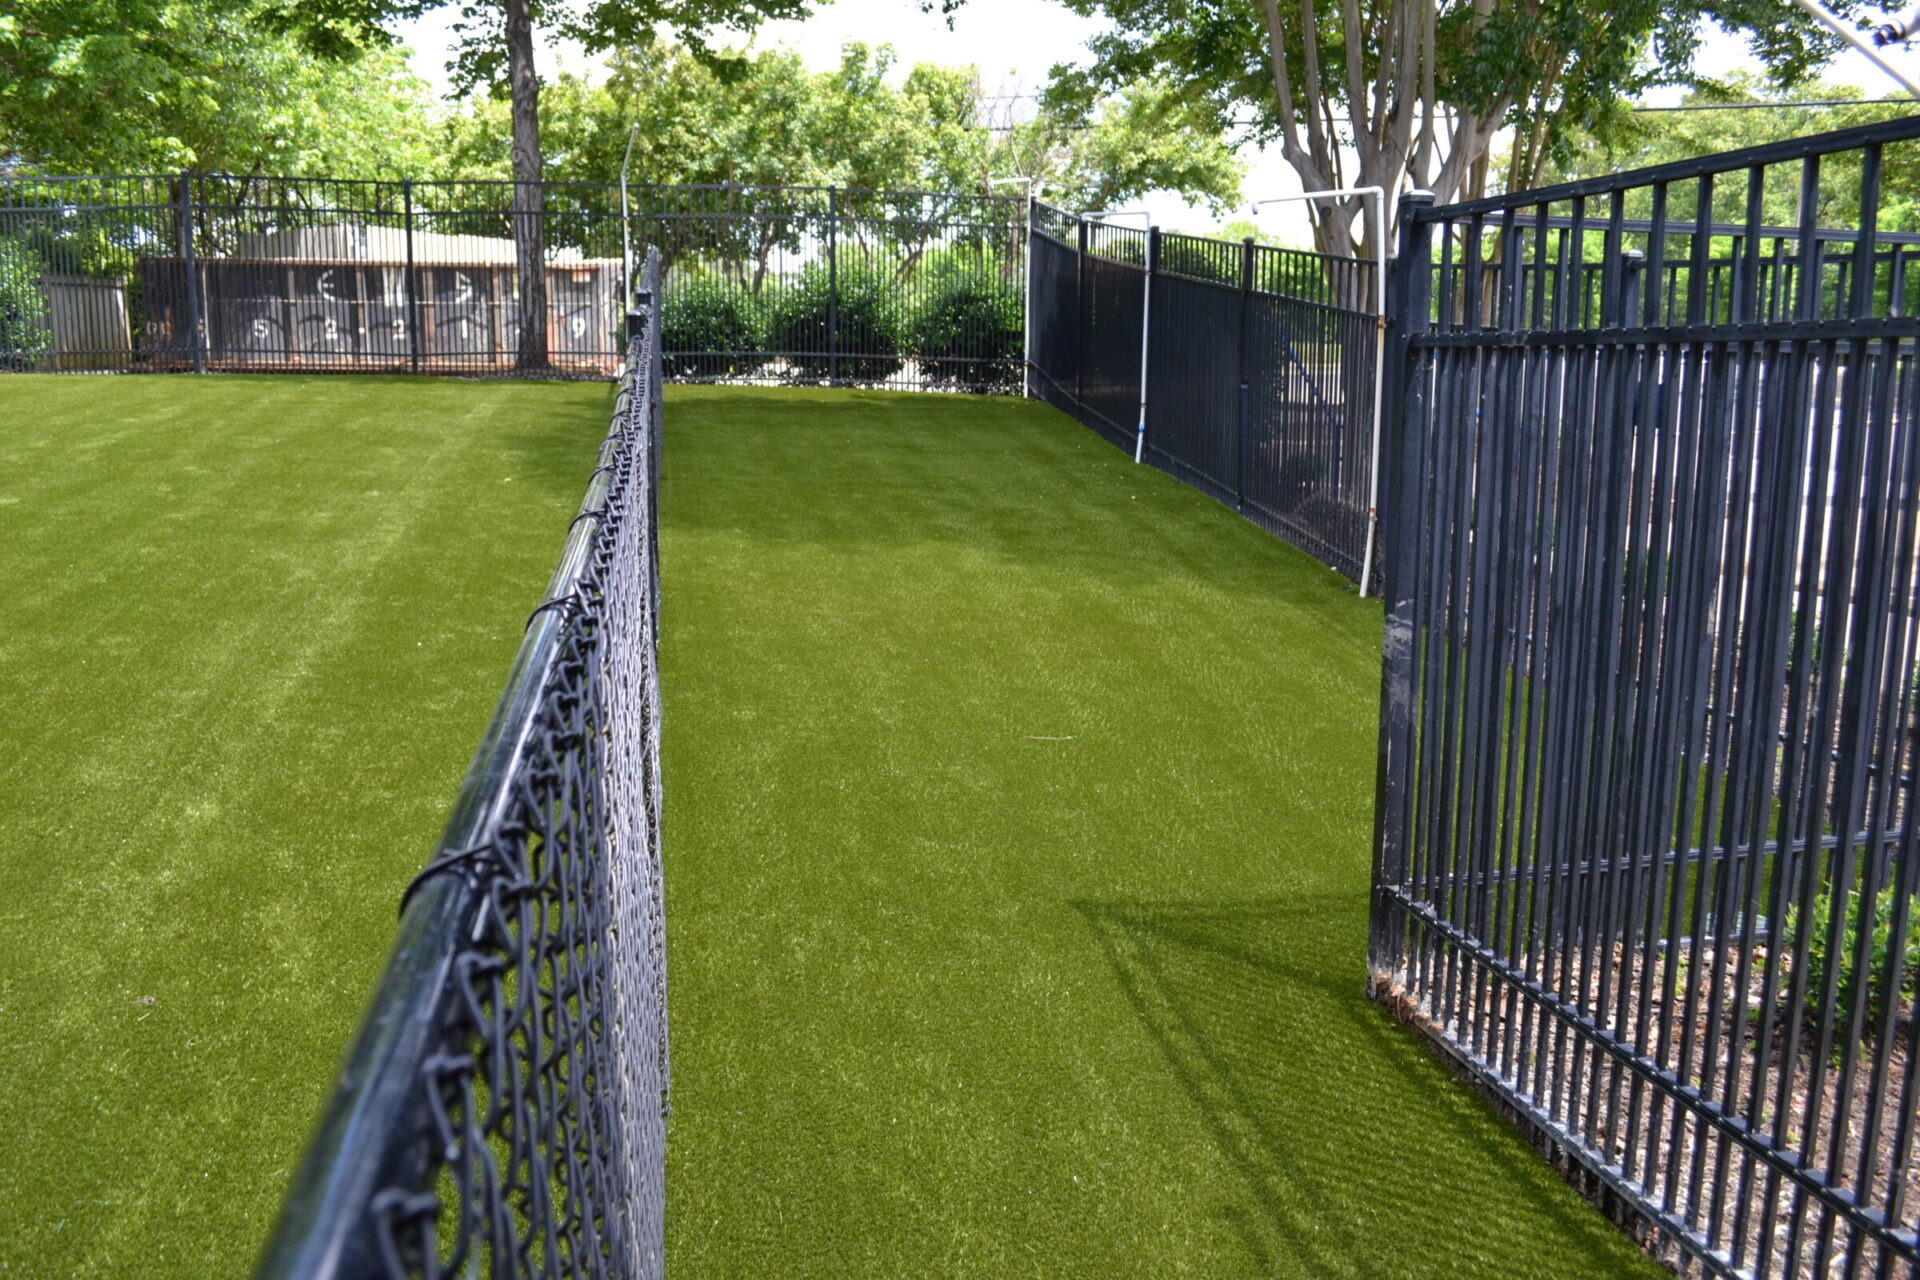 This image shows an empty outdoor area with artificial green turf surrounded by black metal fencing under a clear sky with trees in the background.